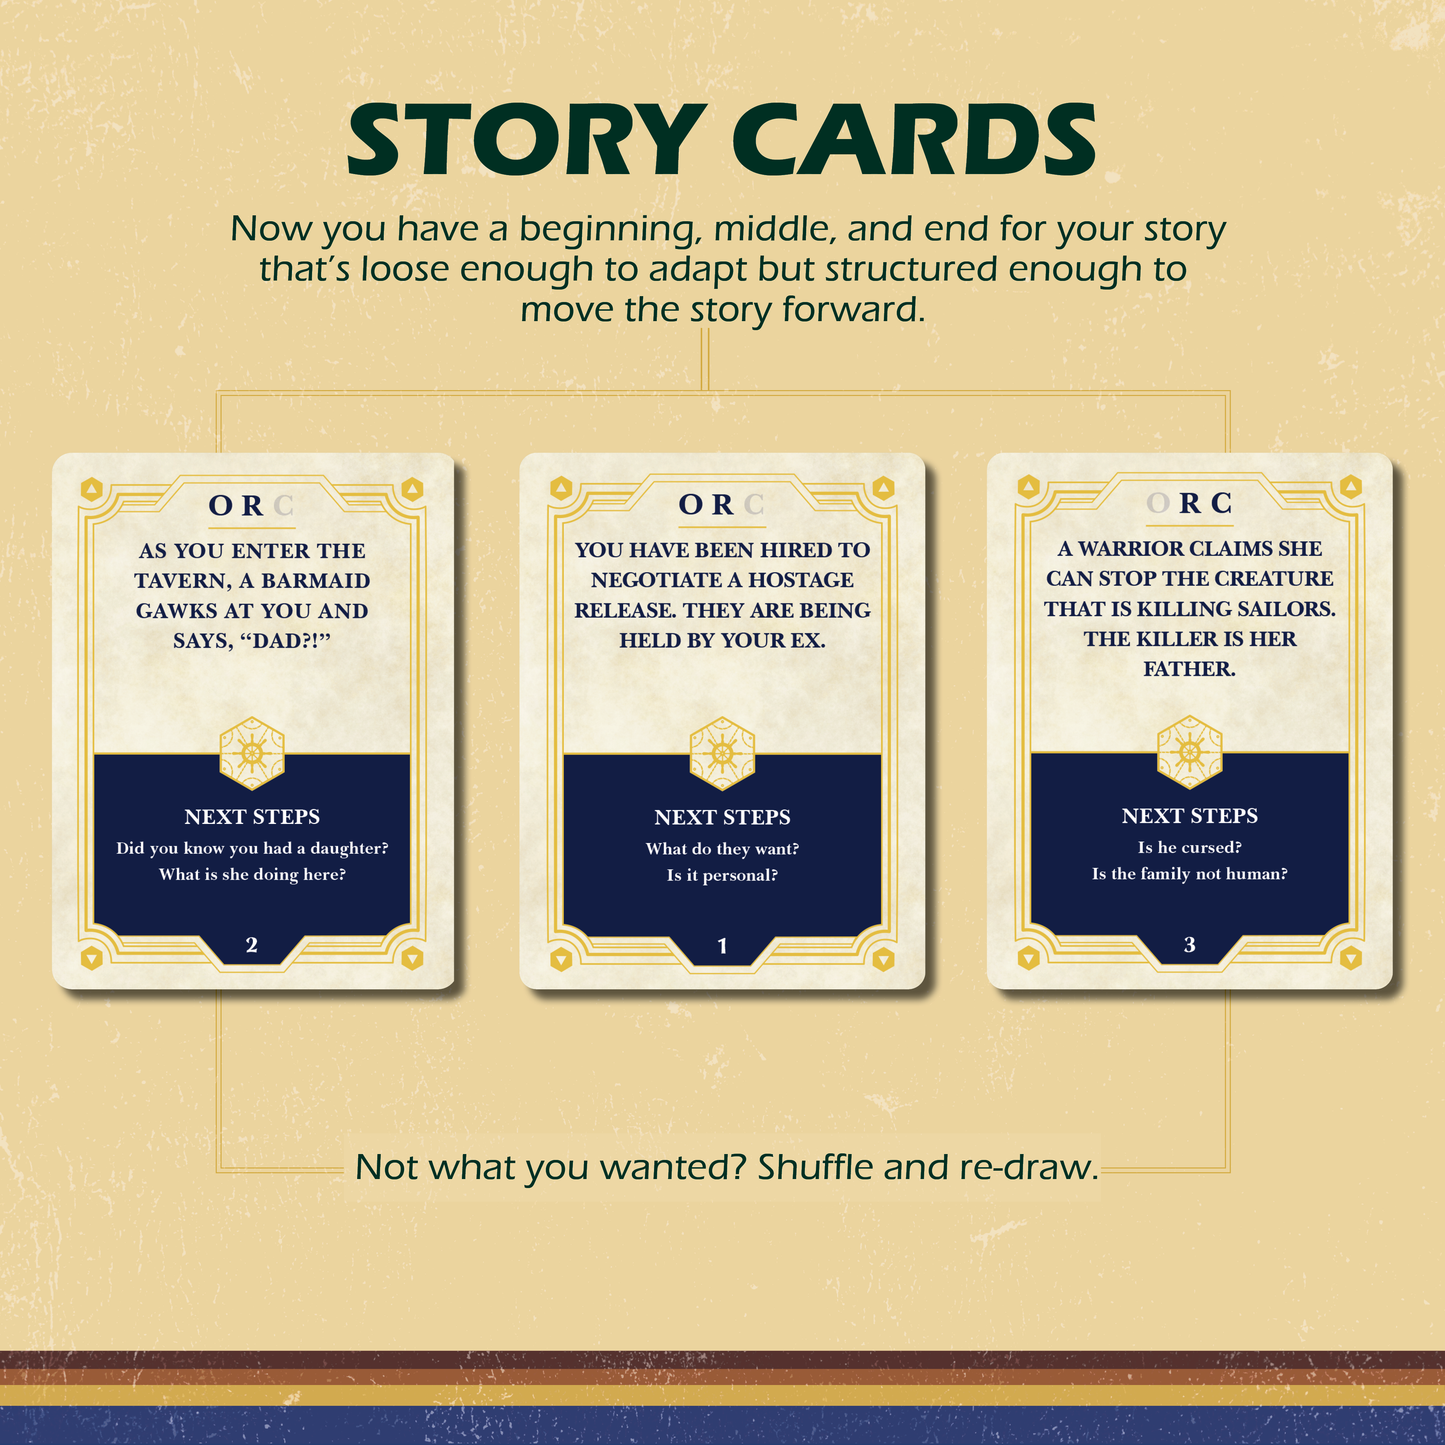 Deck of Stories | High Water Booster | Story Prompt Deck